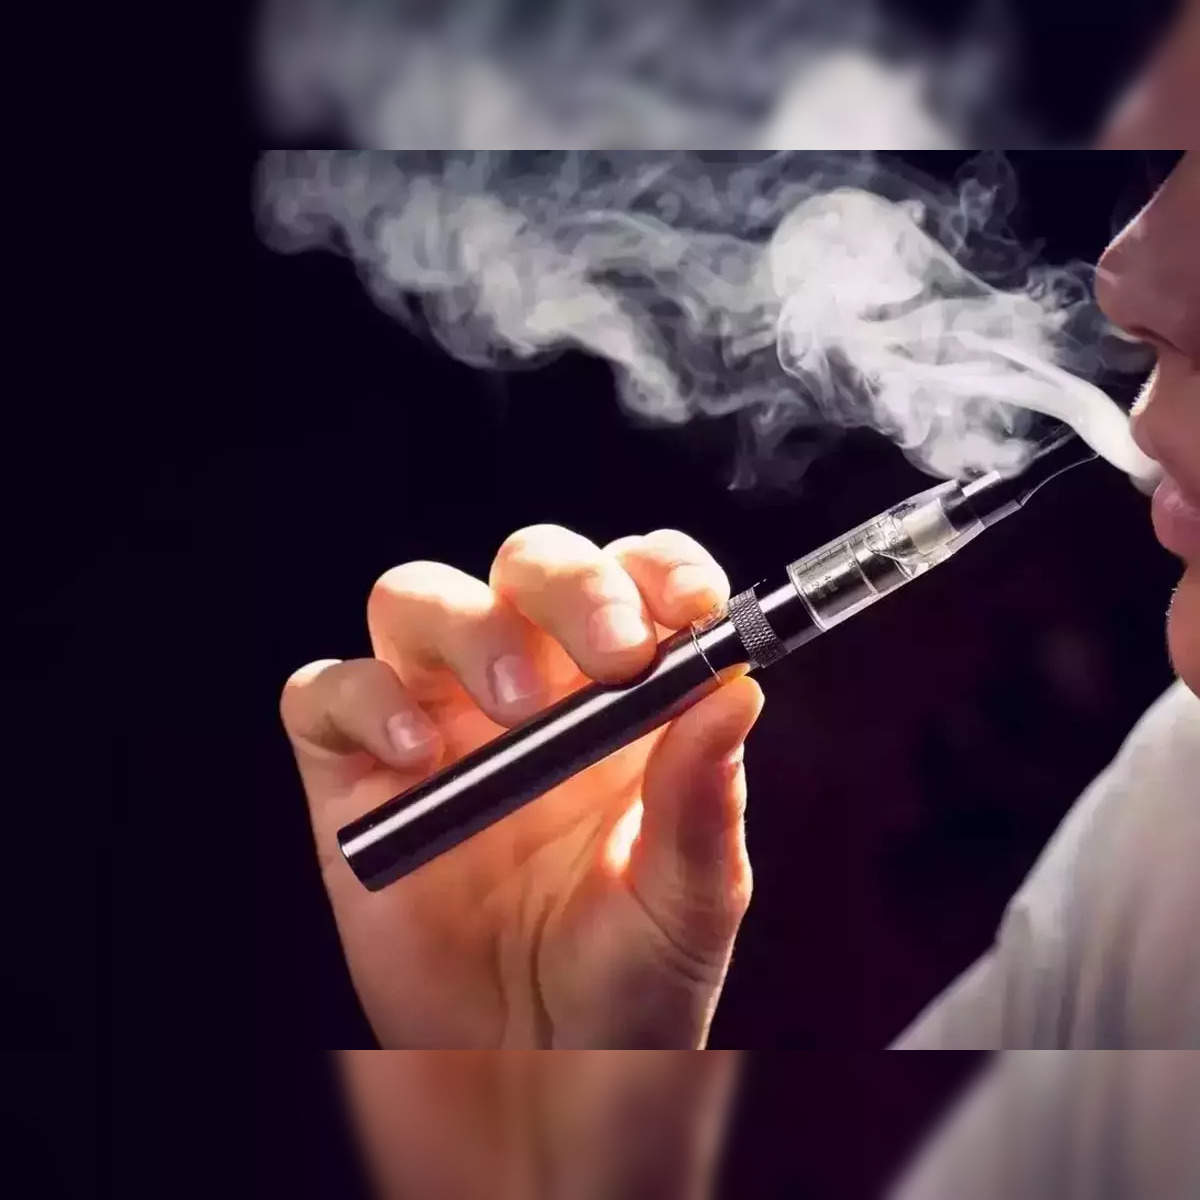 Is the Nicotine in E-Cigarettes Harmful for Your Health?